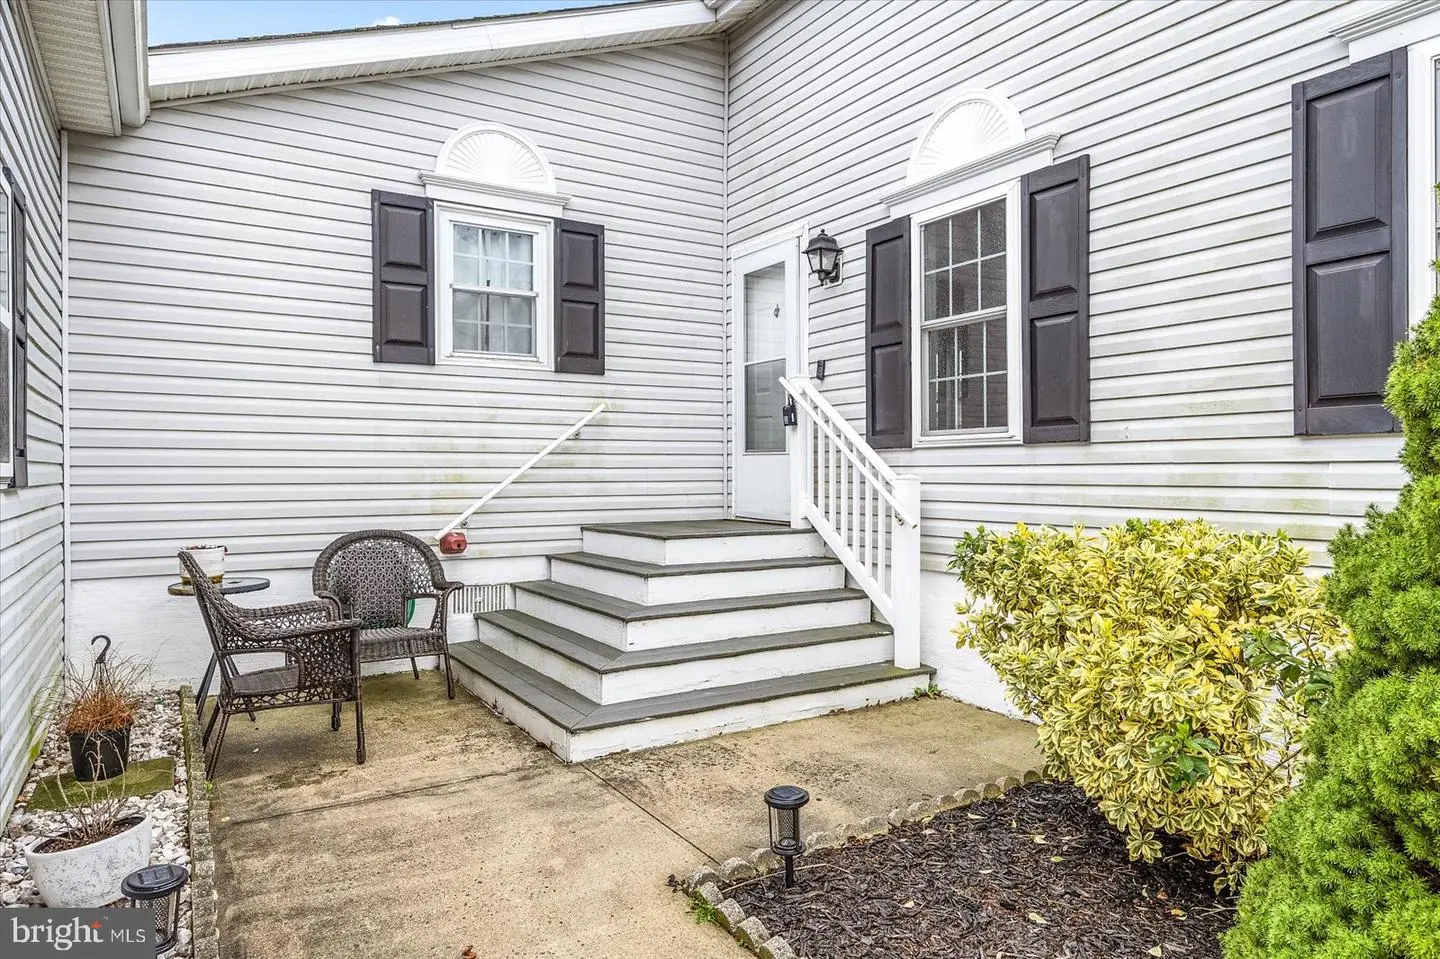 MDWO2020060-802966663386-2024-04-12-00-10-30 58 Anchor Way Dr | Berlin, MD Real Estate For Sale | MLS# Mdwo2020060  - 1st Choice Properties